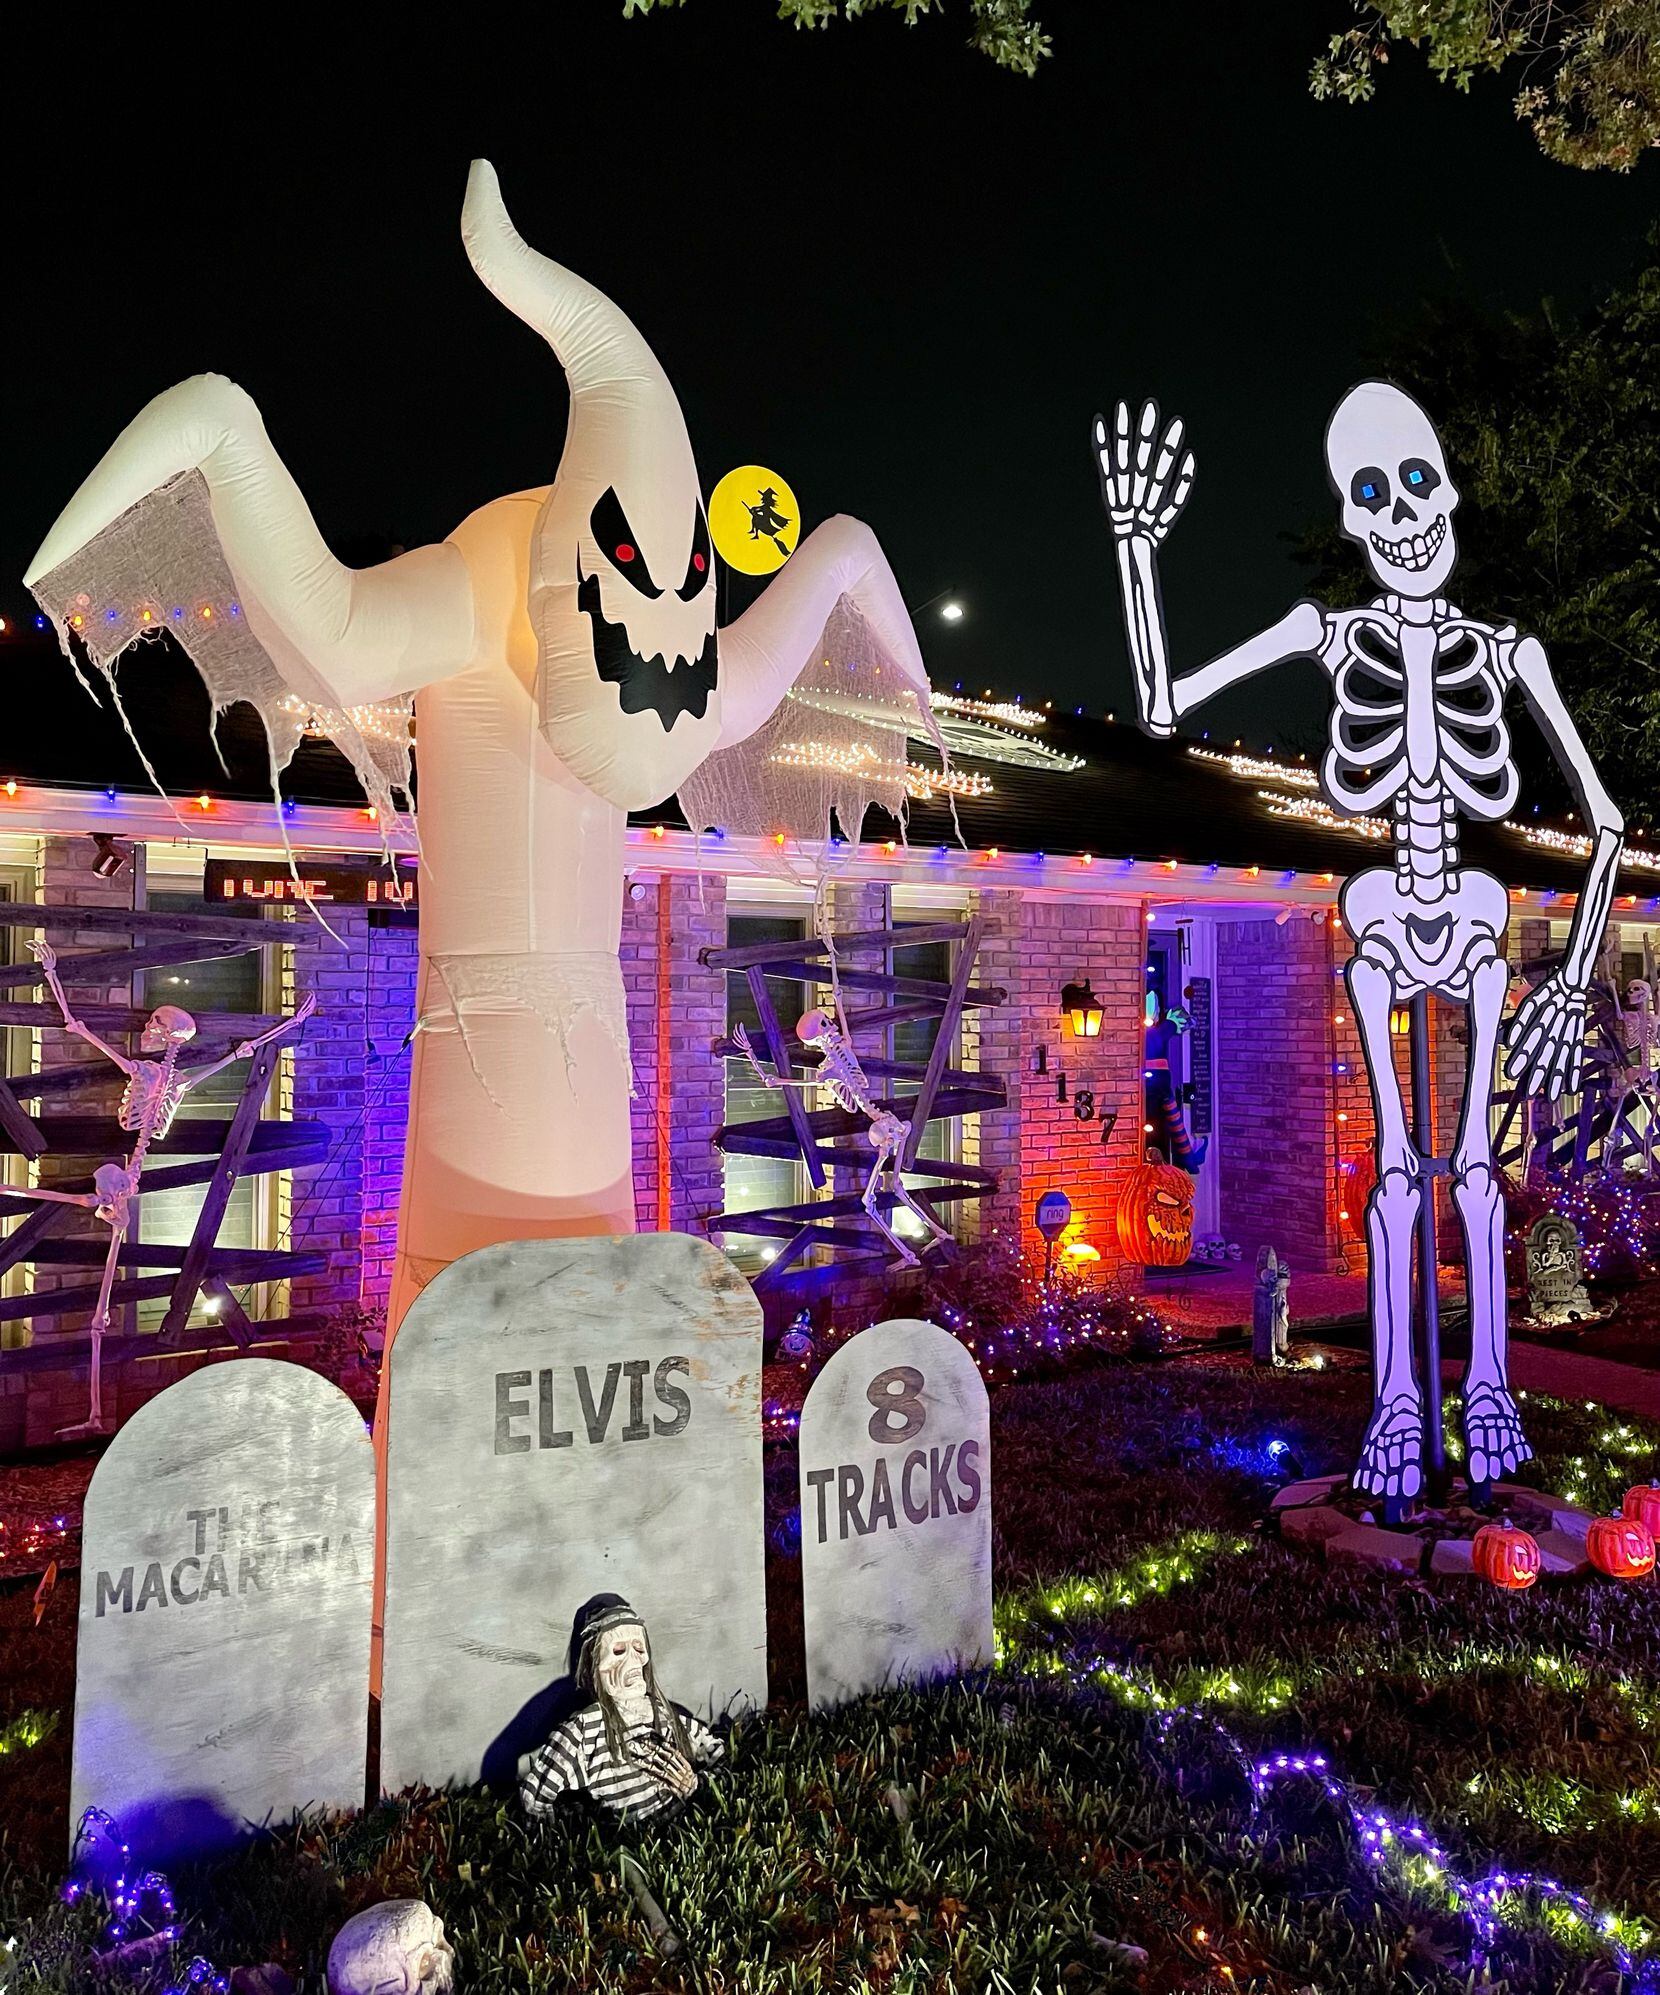 The Halloween decorations are set to festive music, including "Monster Mash," "Thriller" and "Ghostbusters."